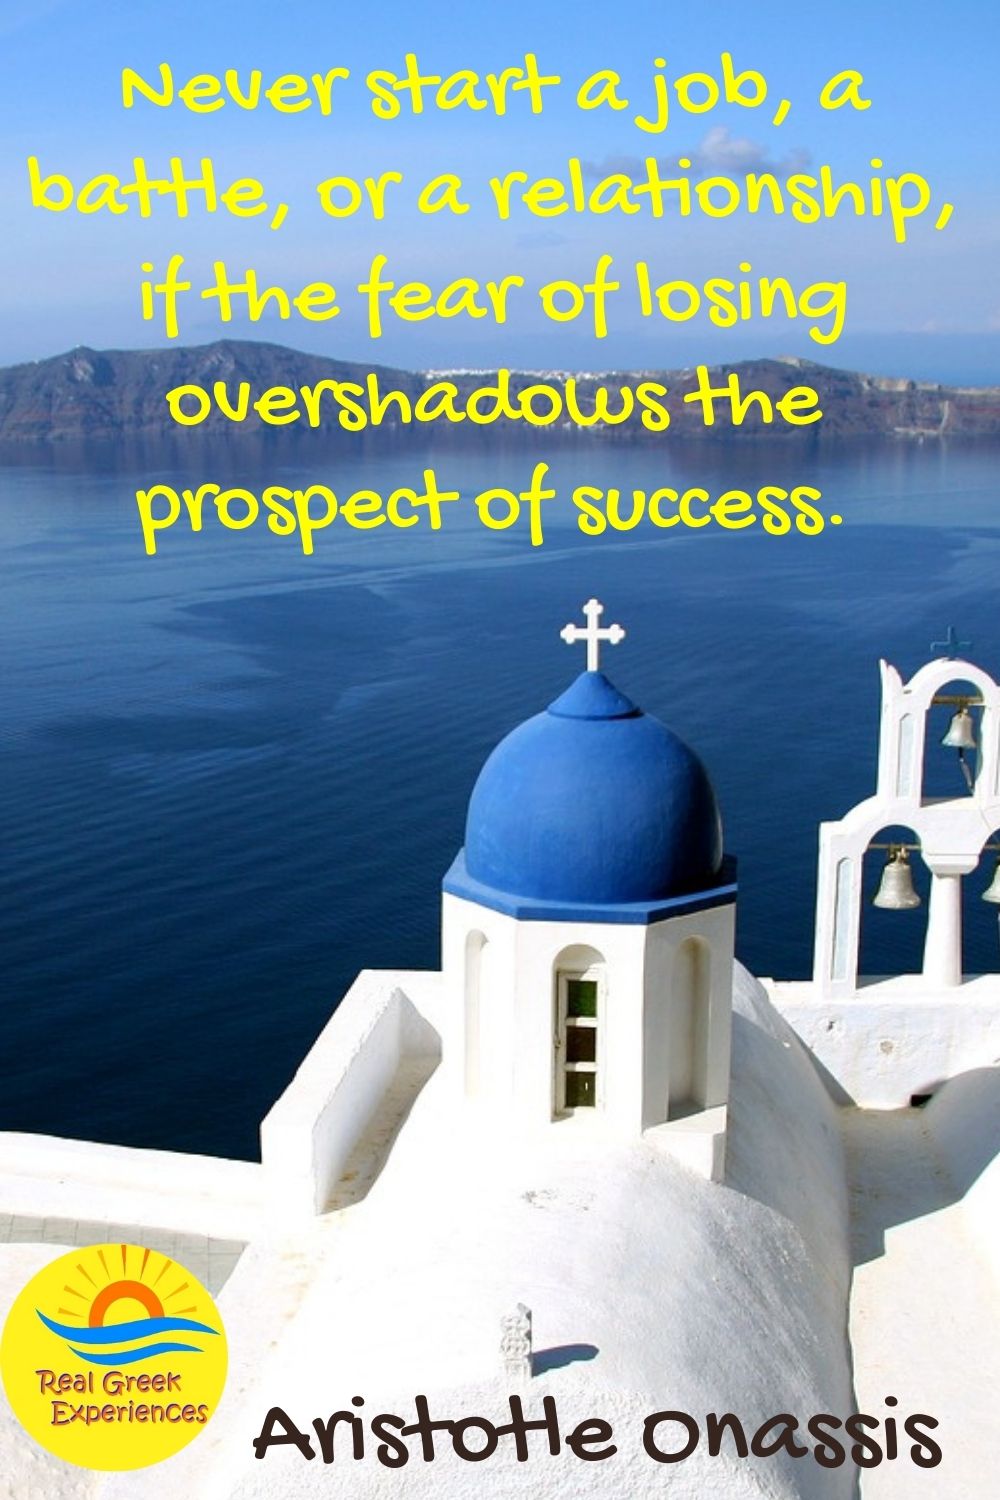 Quotes about Greece - Never start a job, a battle, or a relationship, if the fear of losing overshadows the prospect of success - Aristotle Onassis